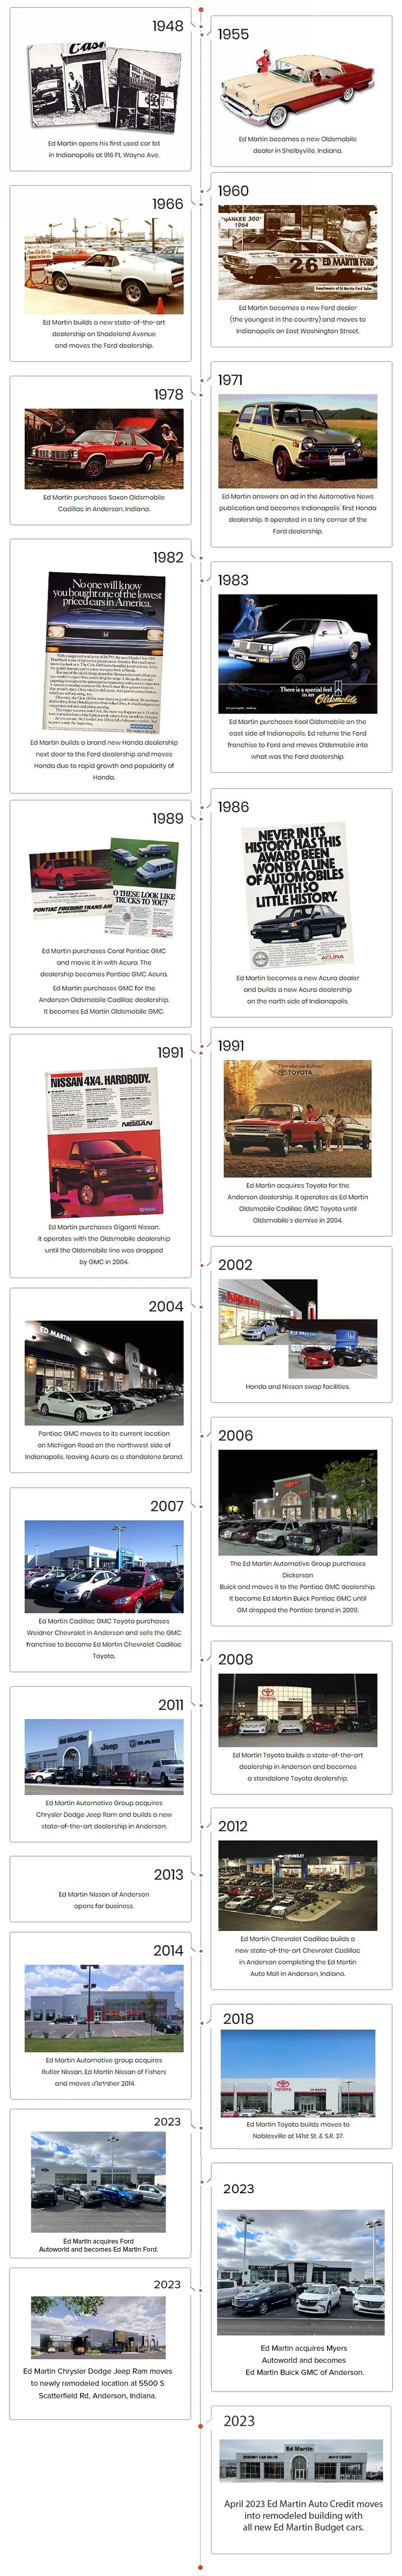 Timeline of the Ed Martin Automotive Group's history